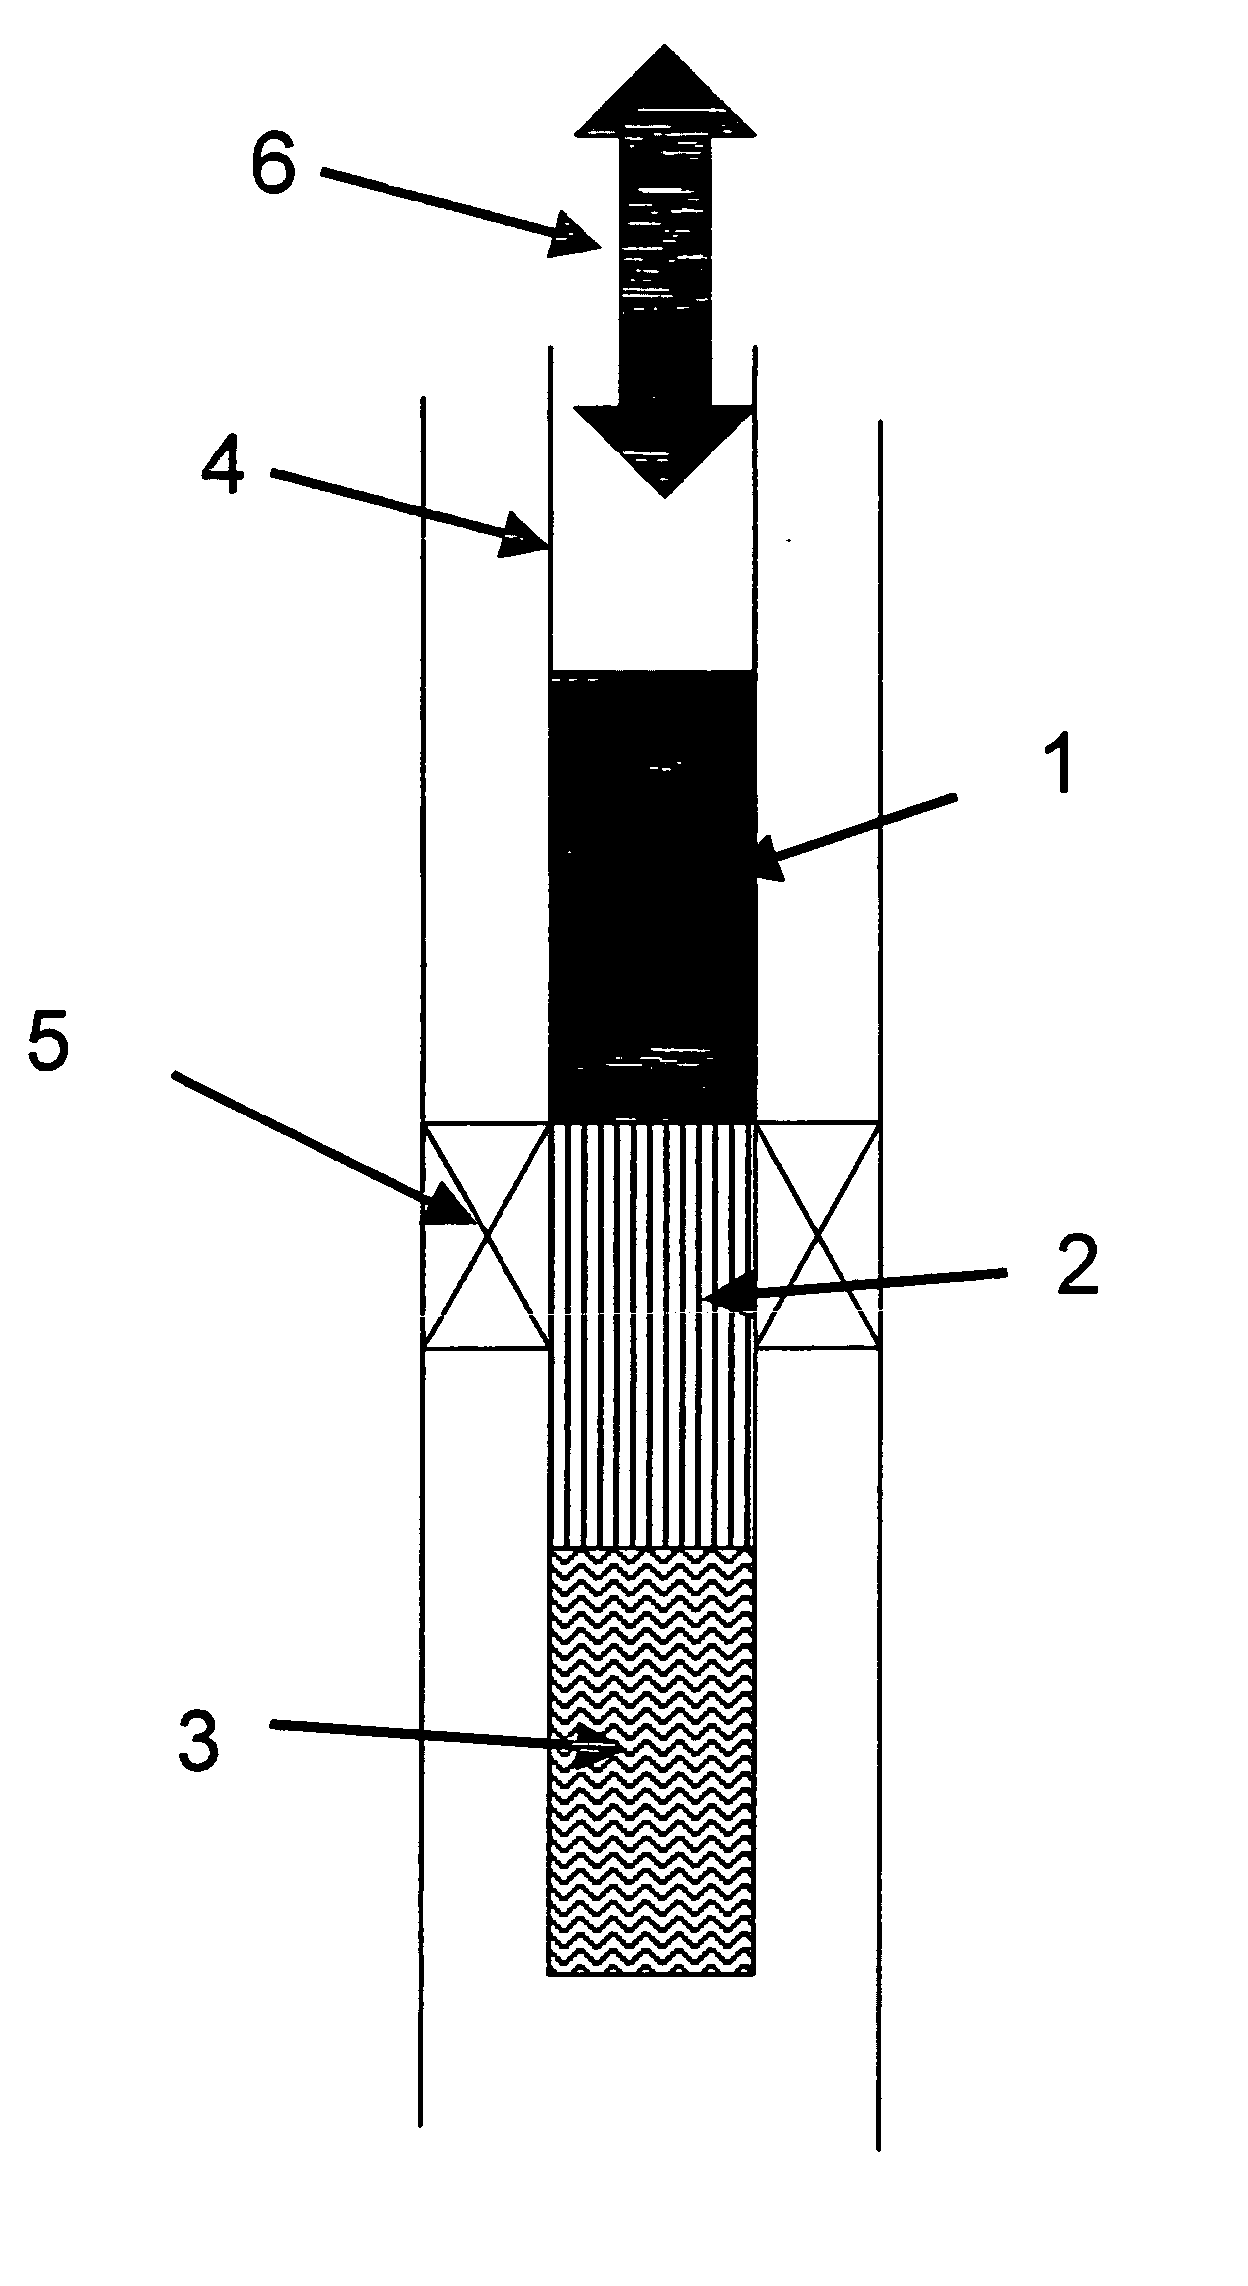 Downhole ultrasonic well cleaning device